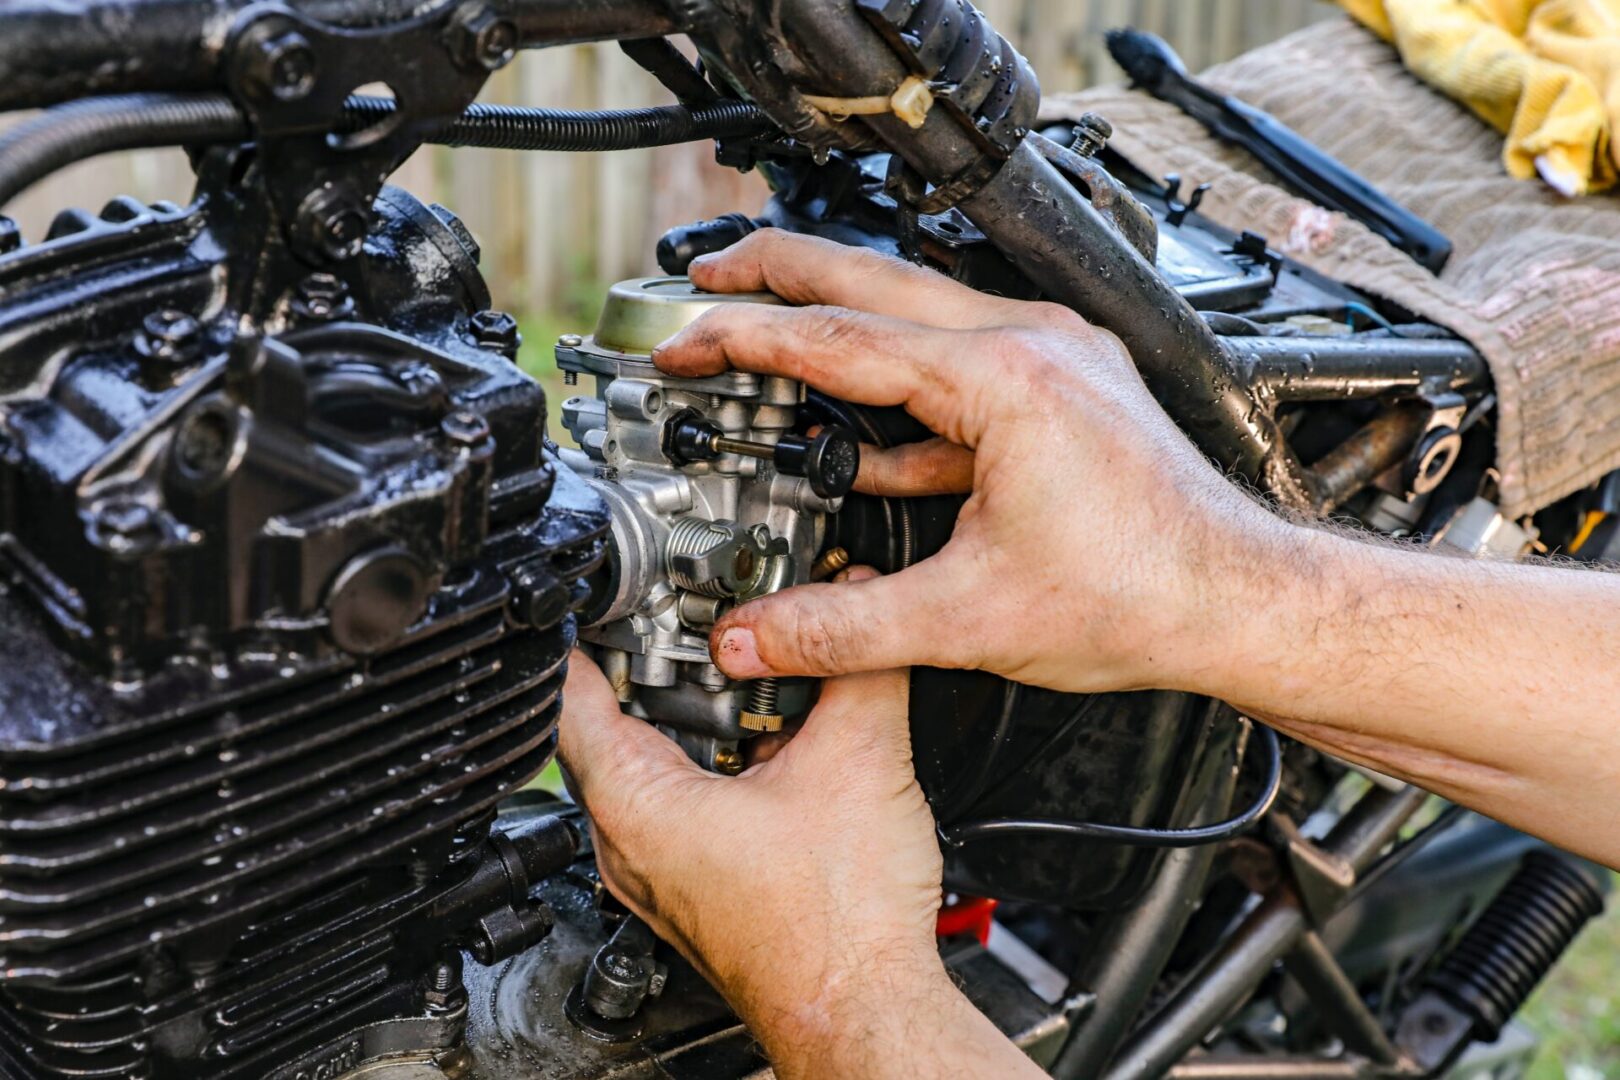 A person working on an engine of a motorcycle.